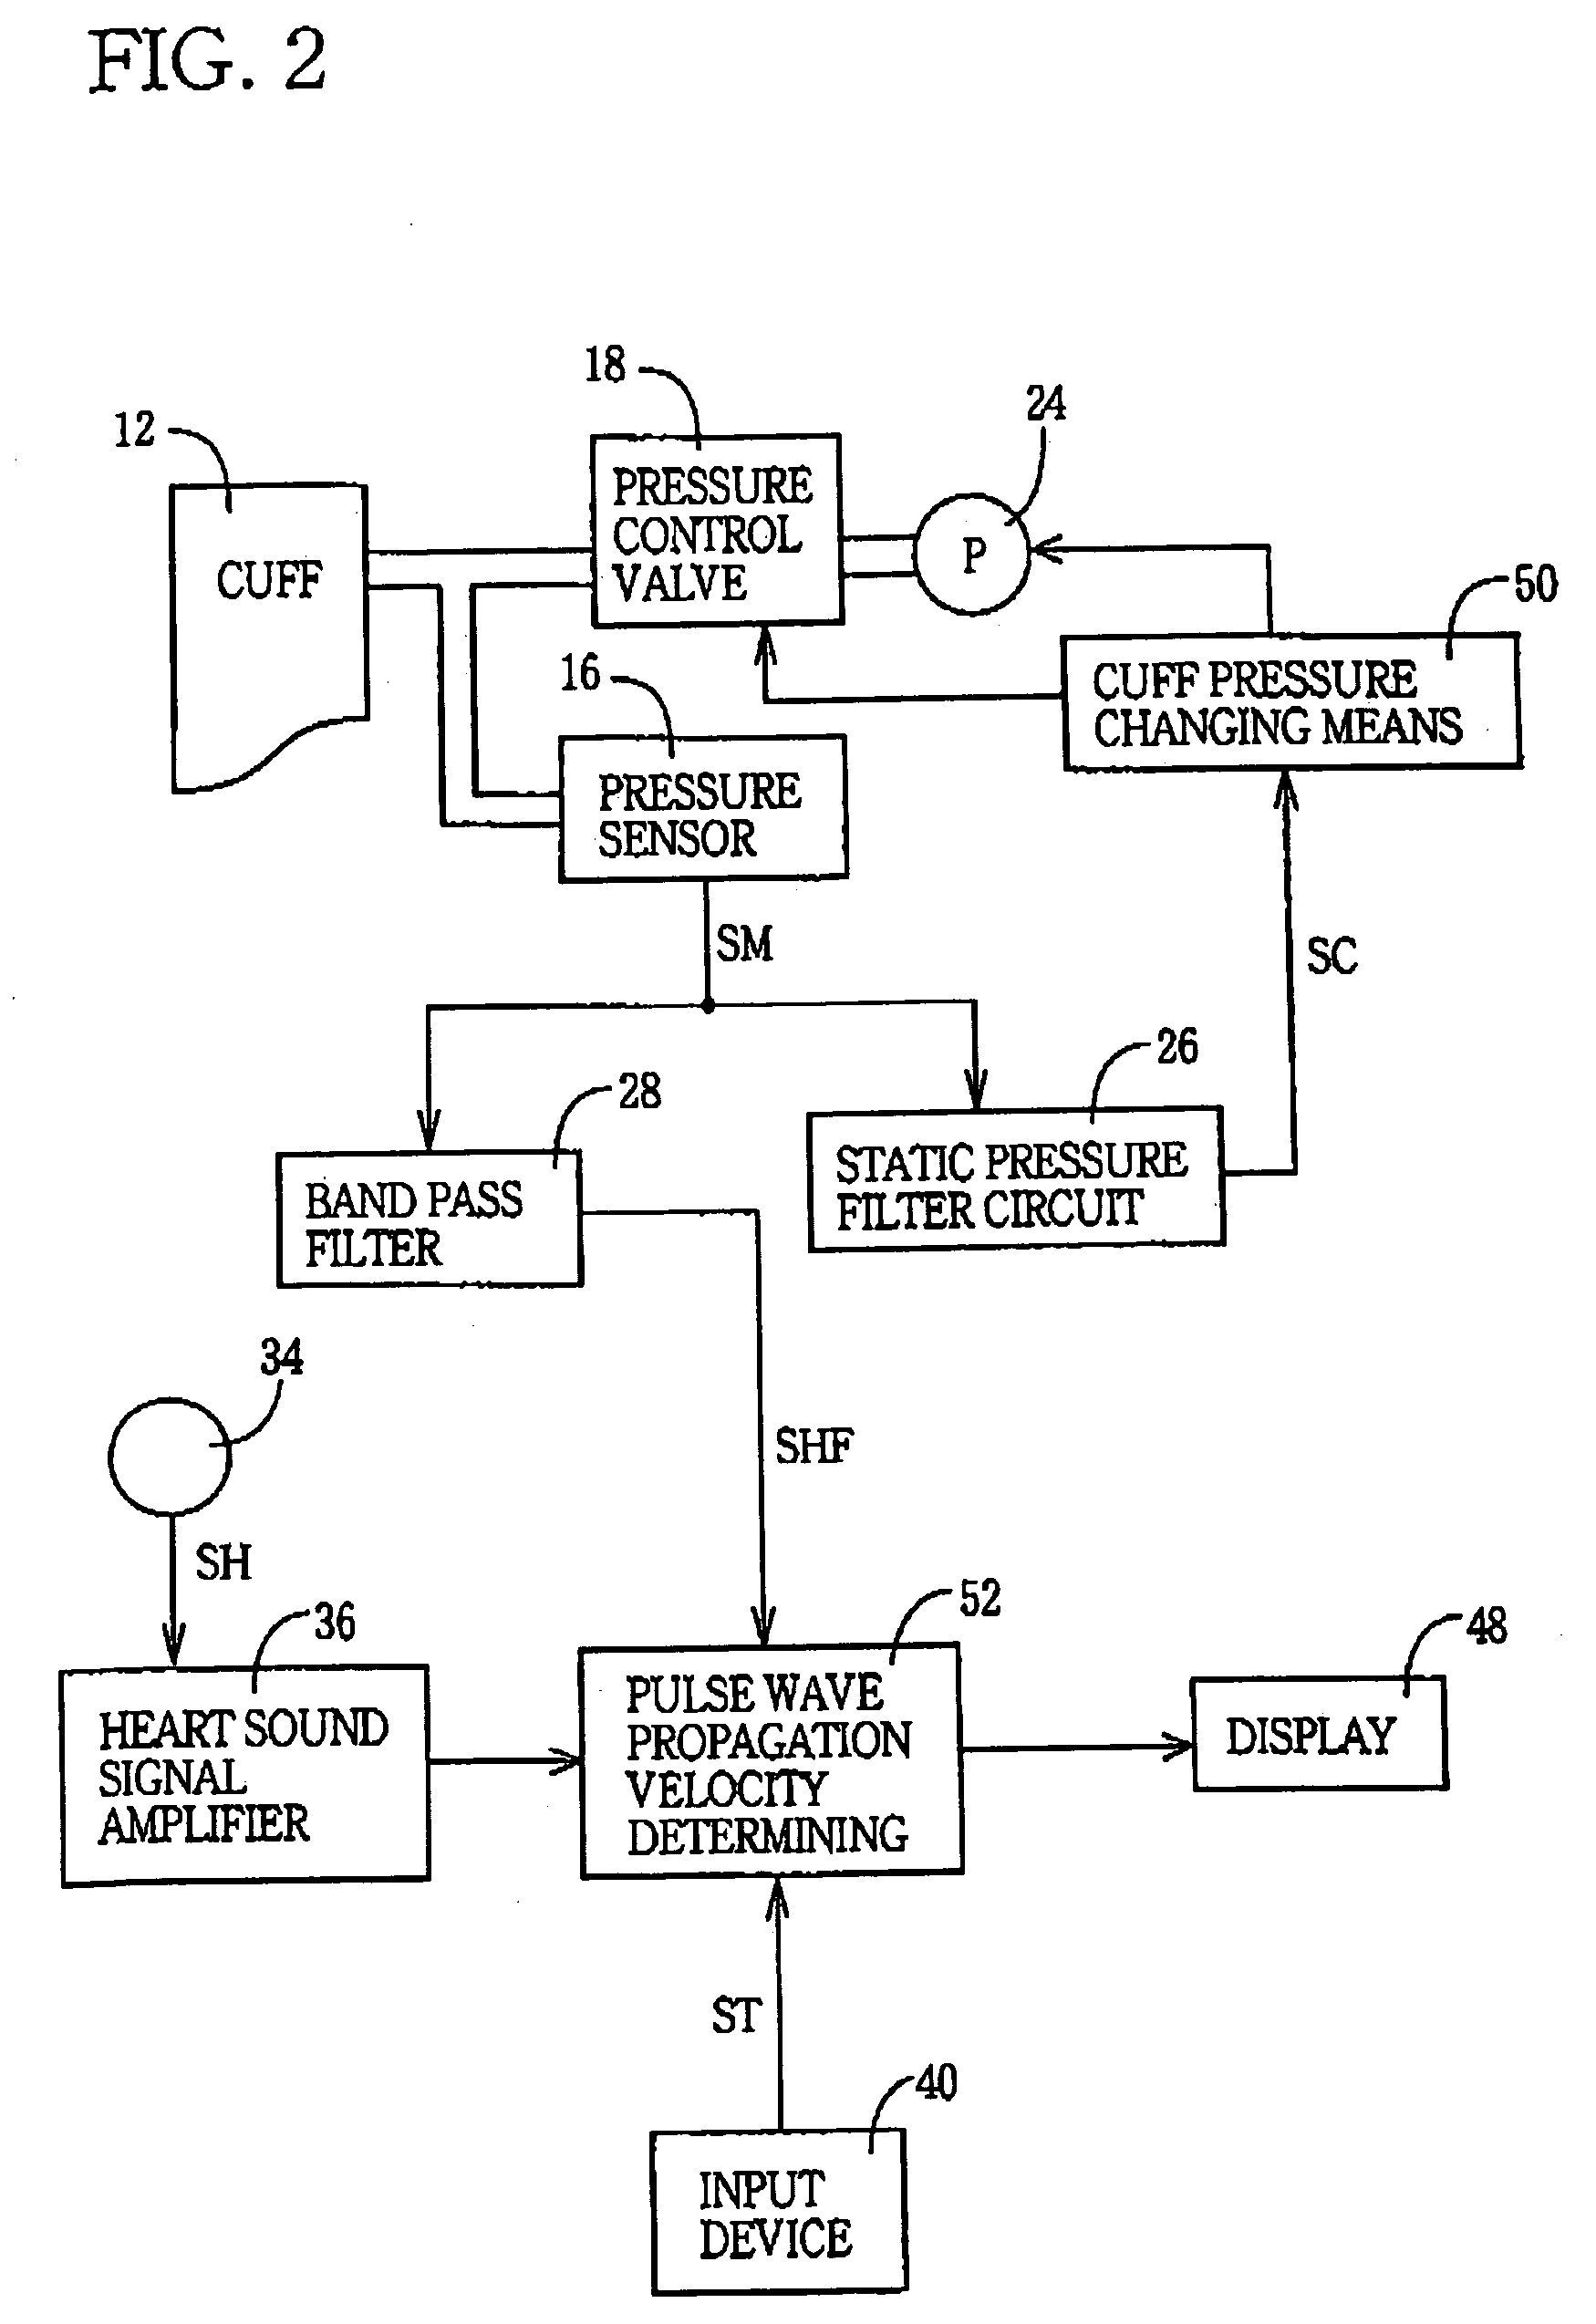 Filter for use with pulse-wave sensor and pulse wave analyzing apparatus